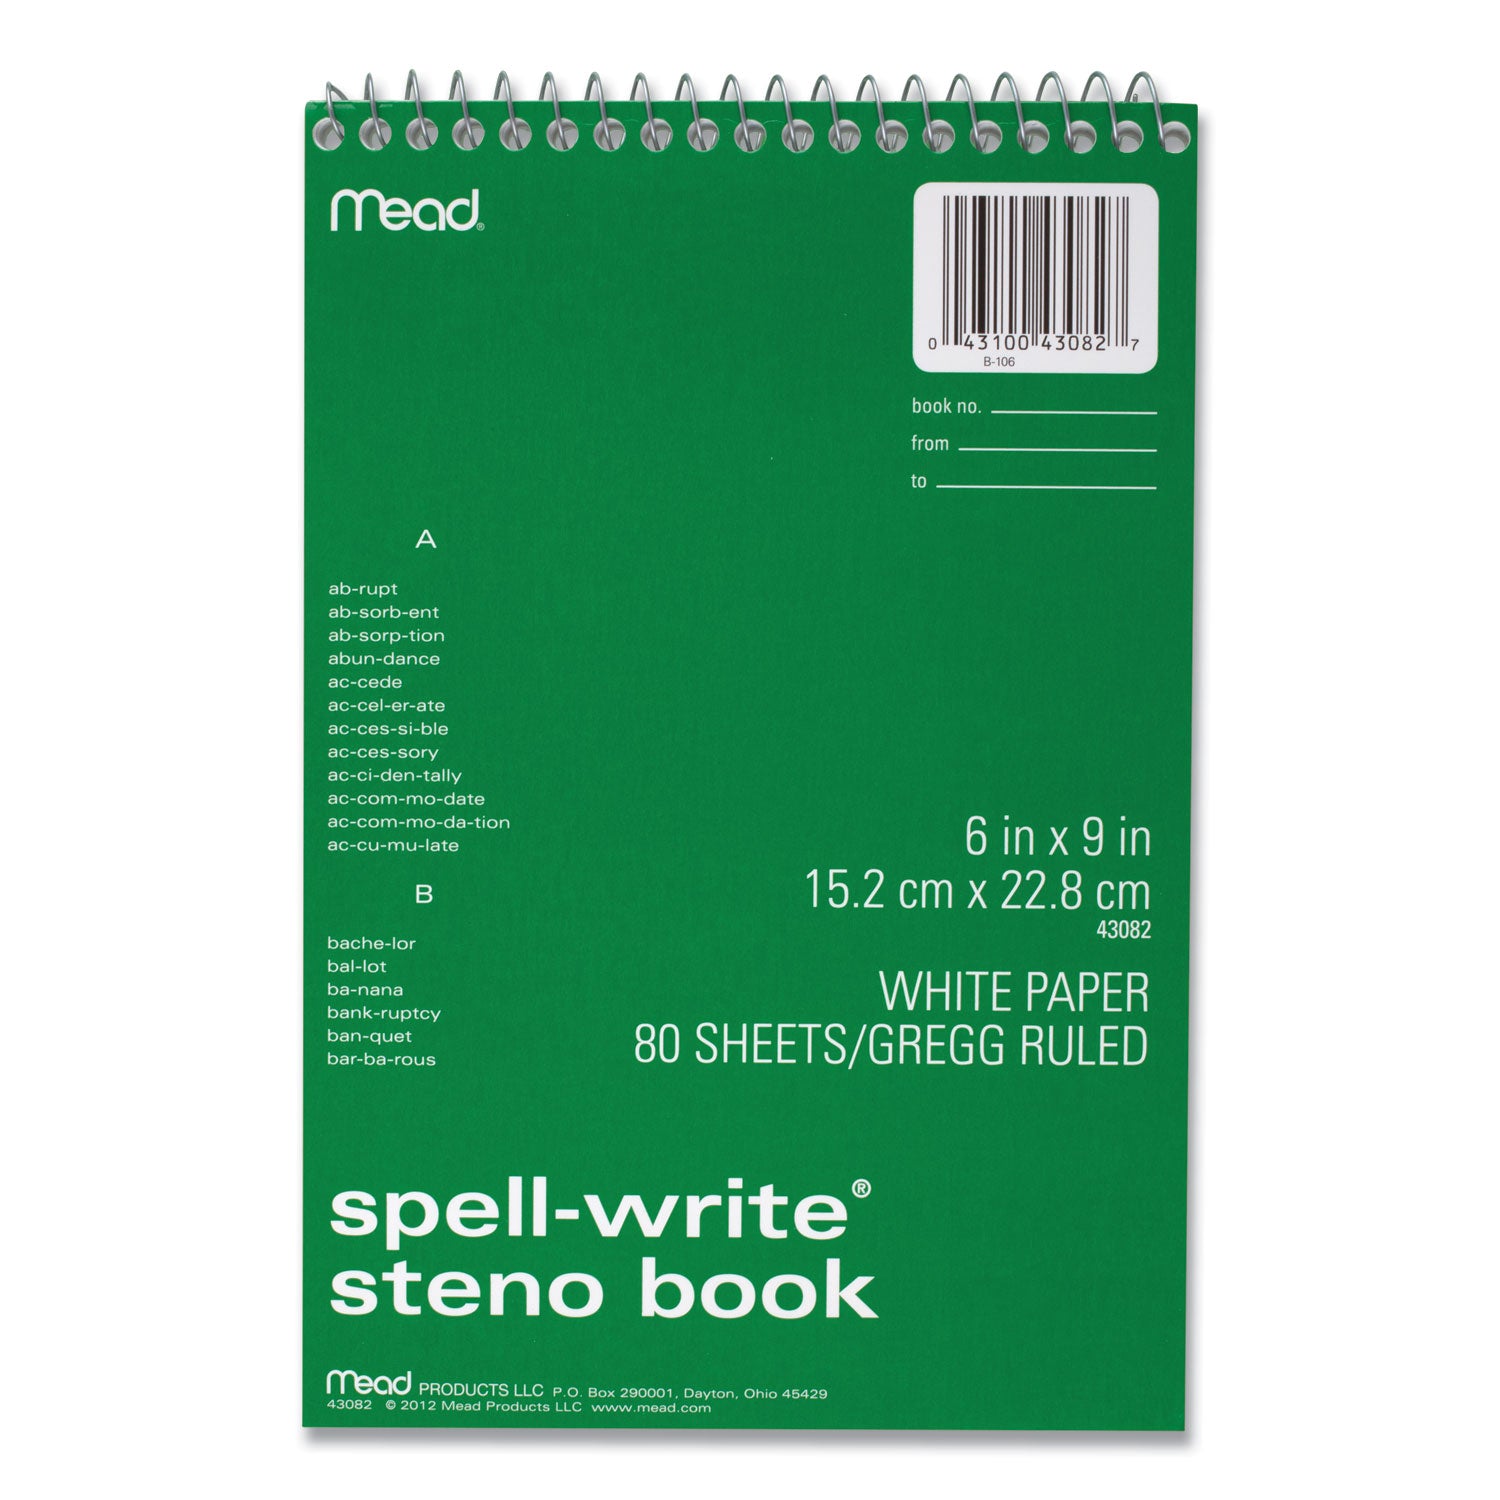 Spell-Write Wirebound Steno Pad, Gregg Rule, Randomly Assorted Cover Colors, 80 White 6 x 9 Sheets - 